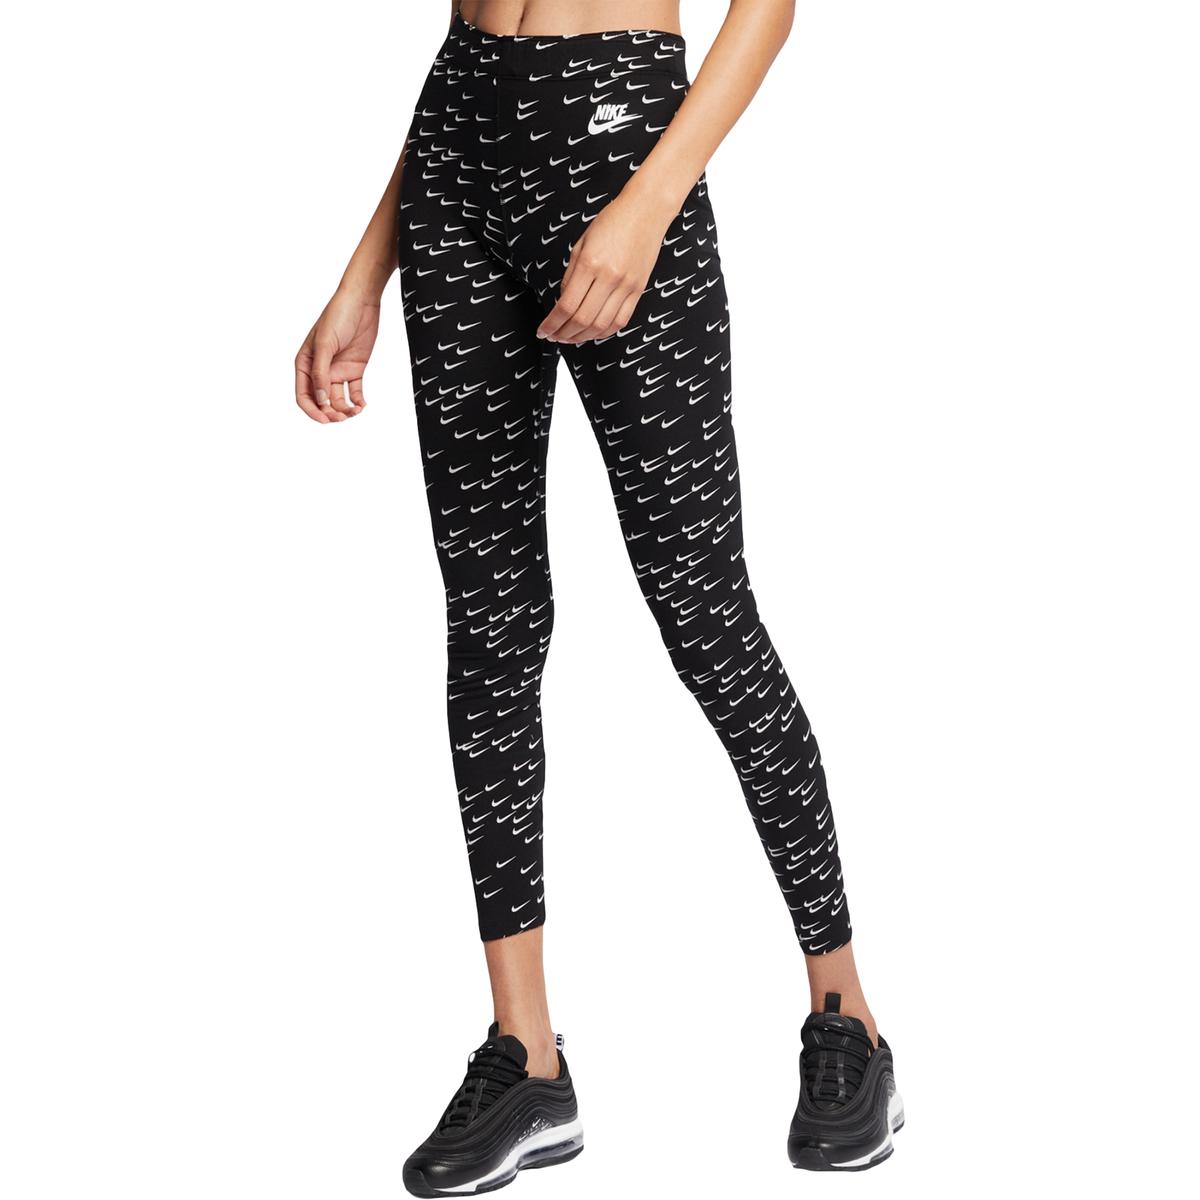 Best Leggings That Stay Up When Running